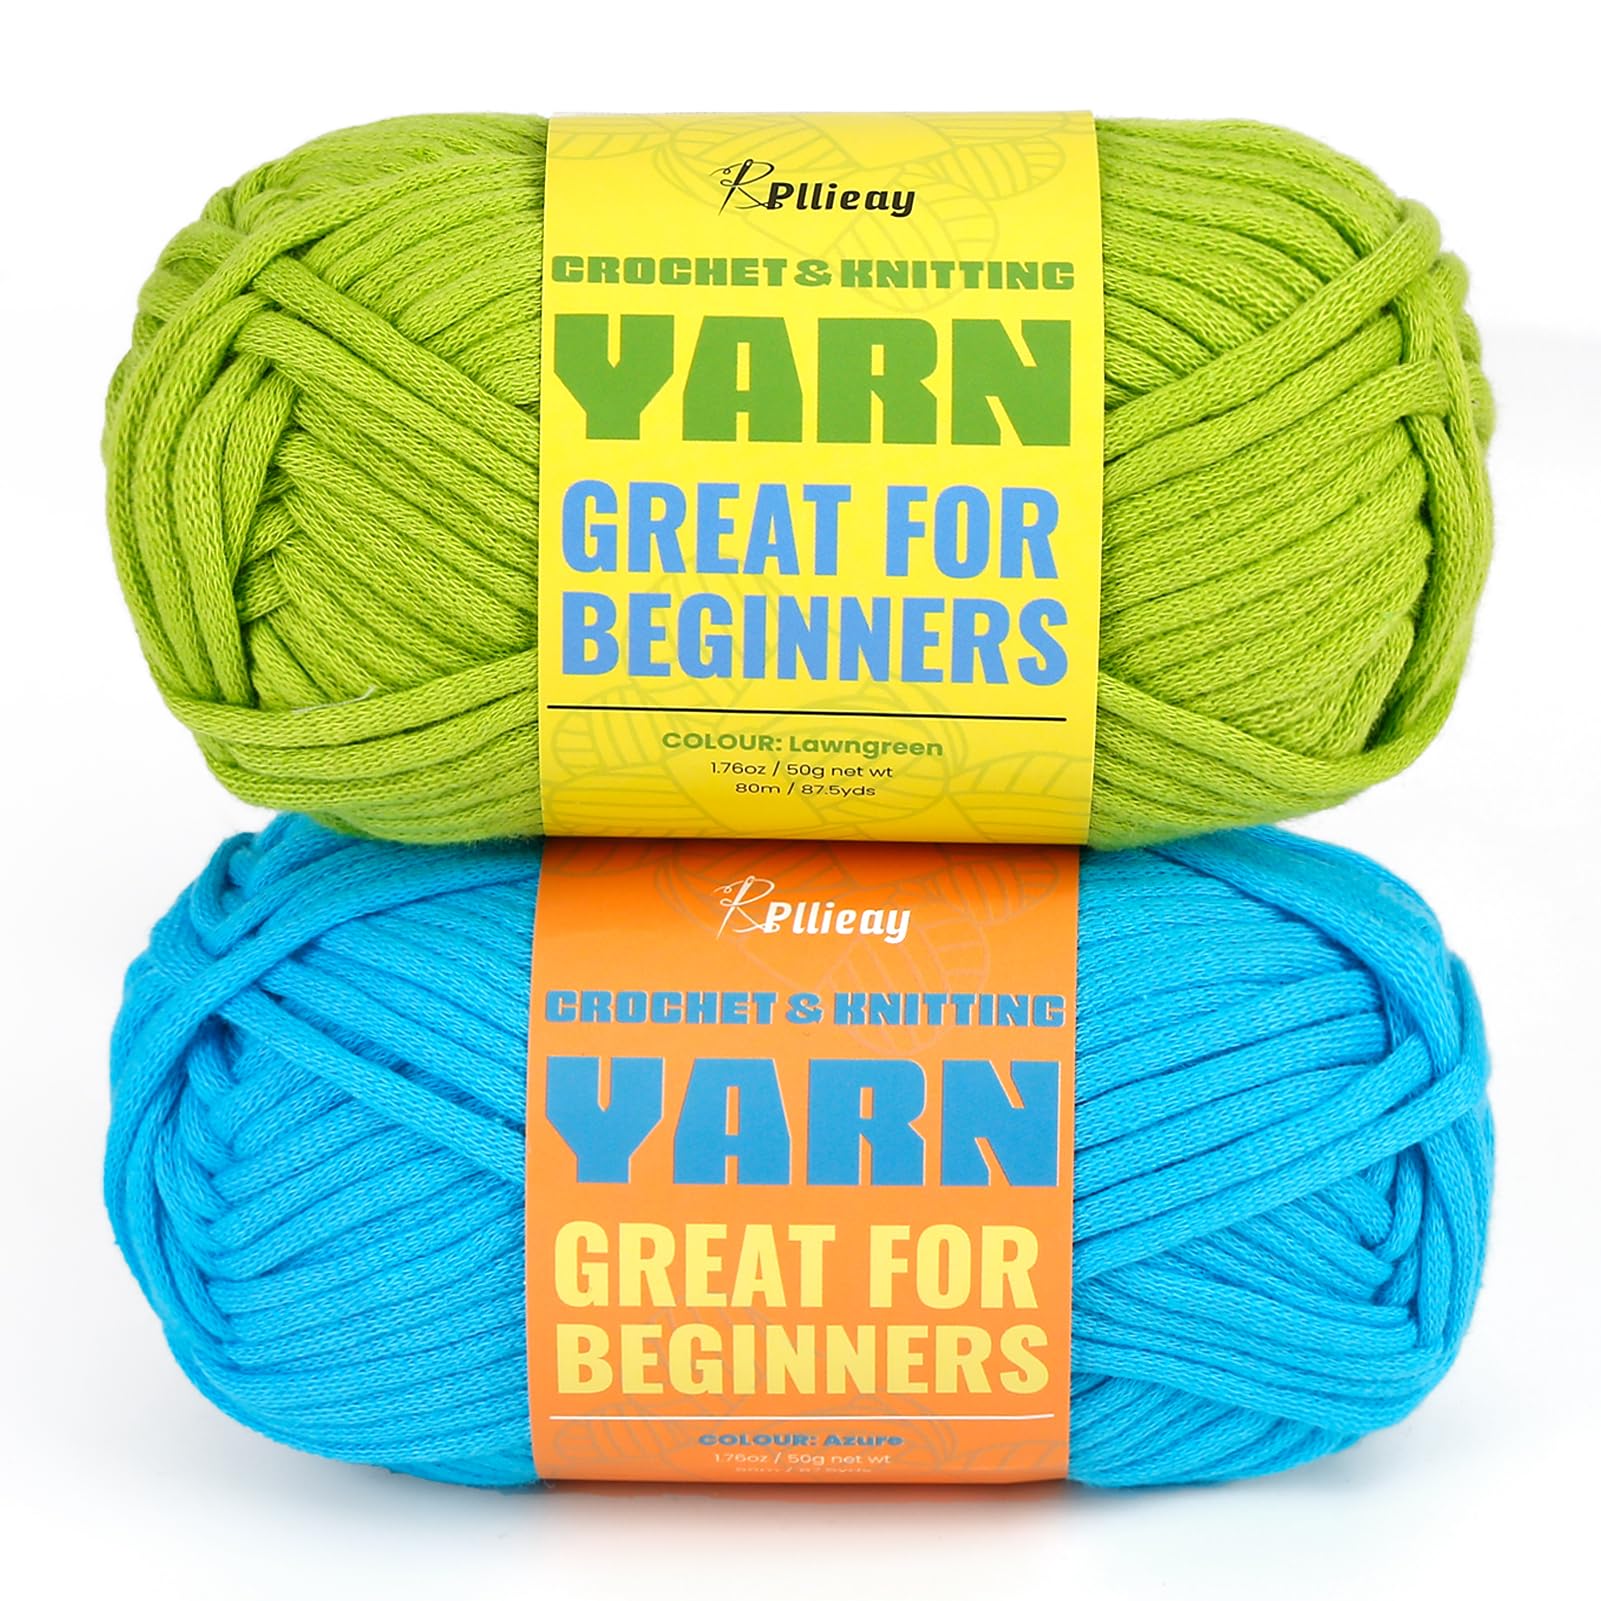 1pc 50g 80m Beginner Crochet Yarn Easy To Use Easy-to-See Stitches Cotton  Crochet Yarn